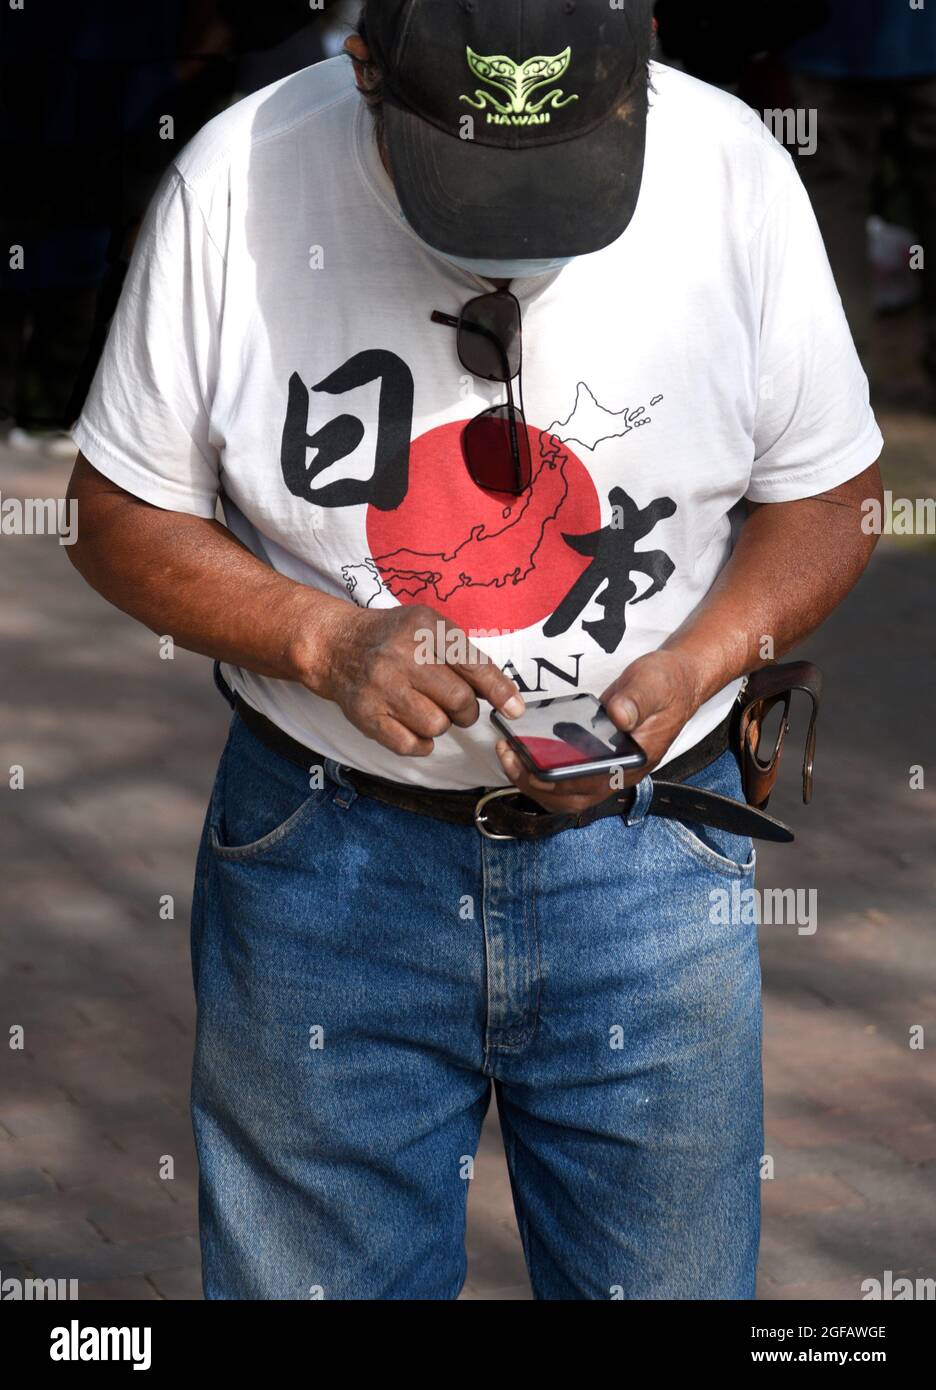 A man wearing a 'Japan' T-shirt uses his smartphone in Santa Fe, New Mexico. Stock Photo